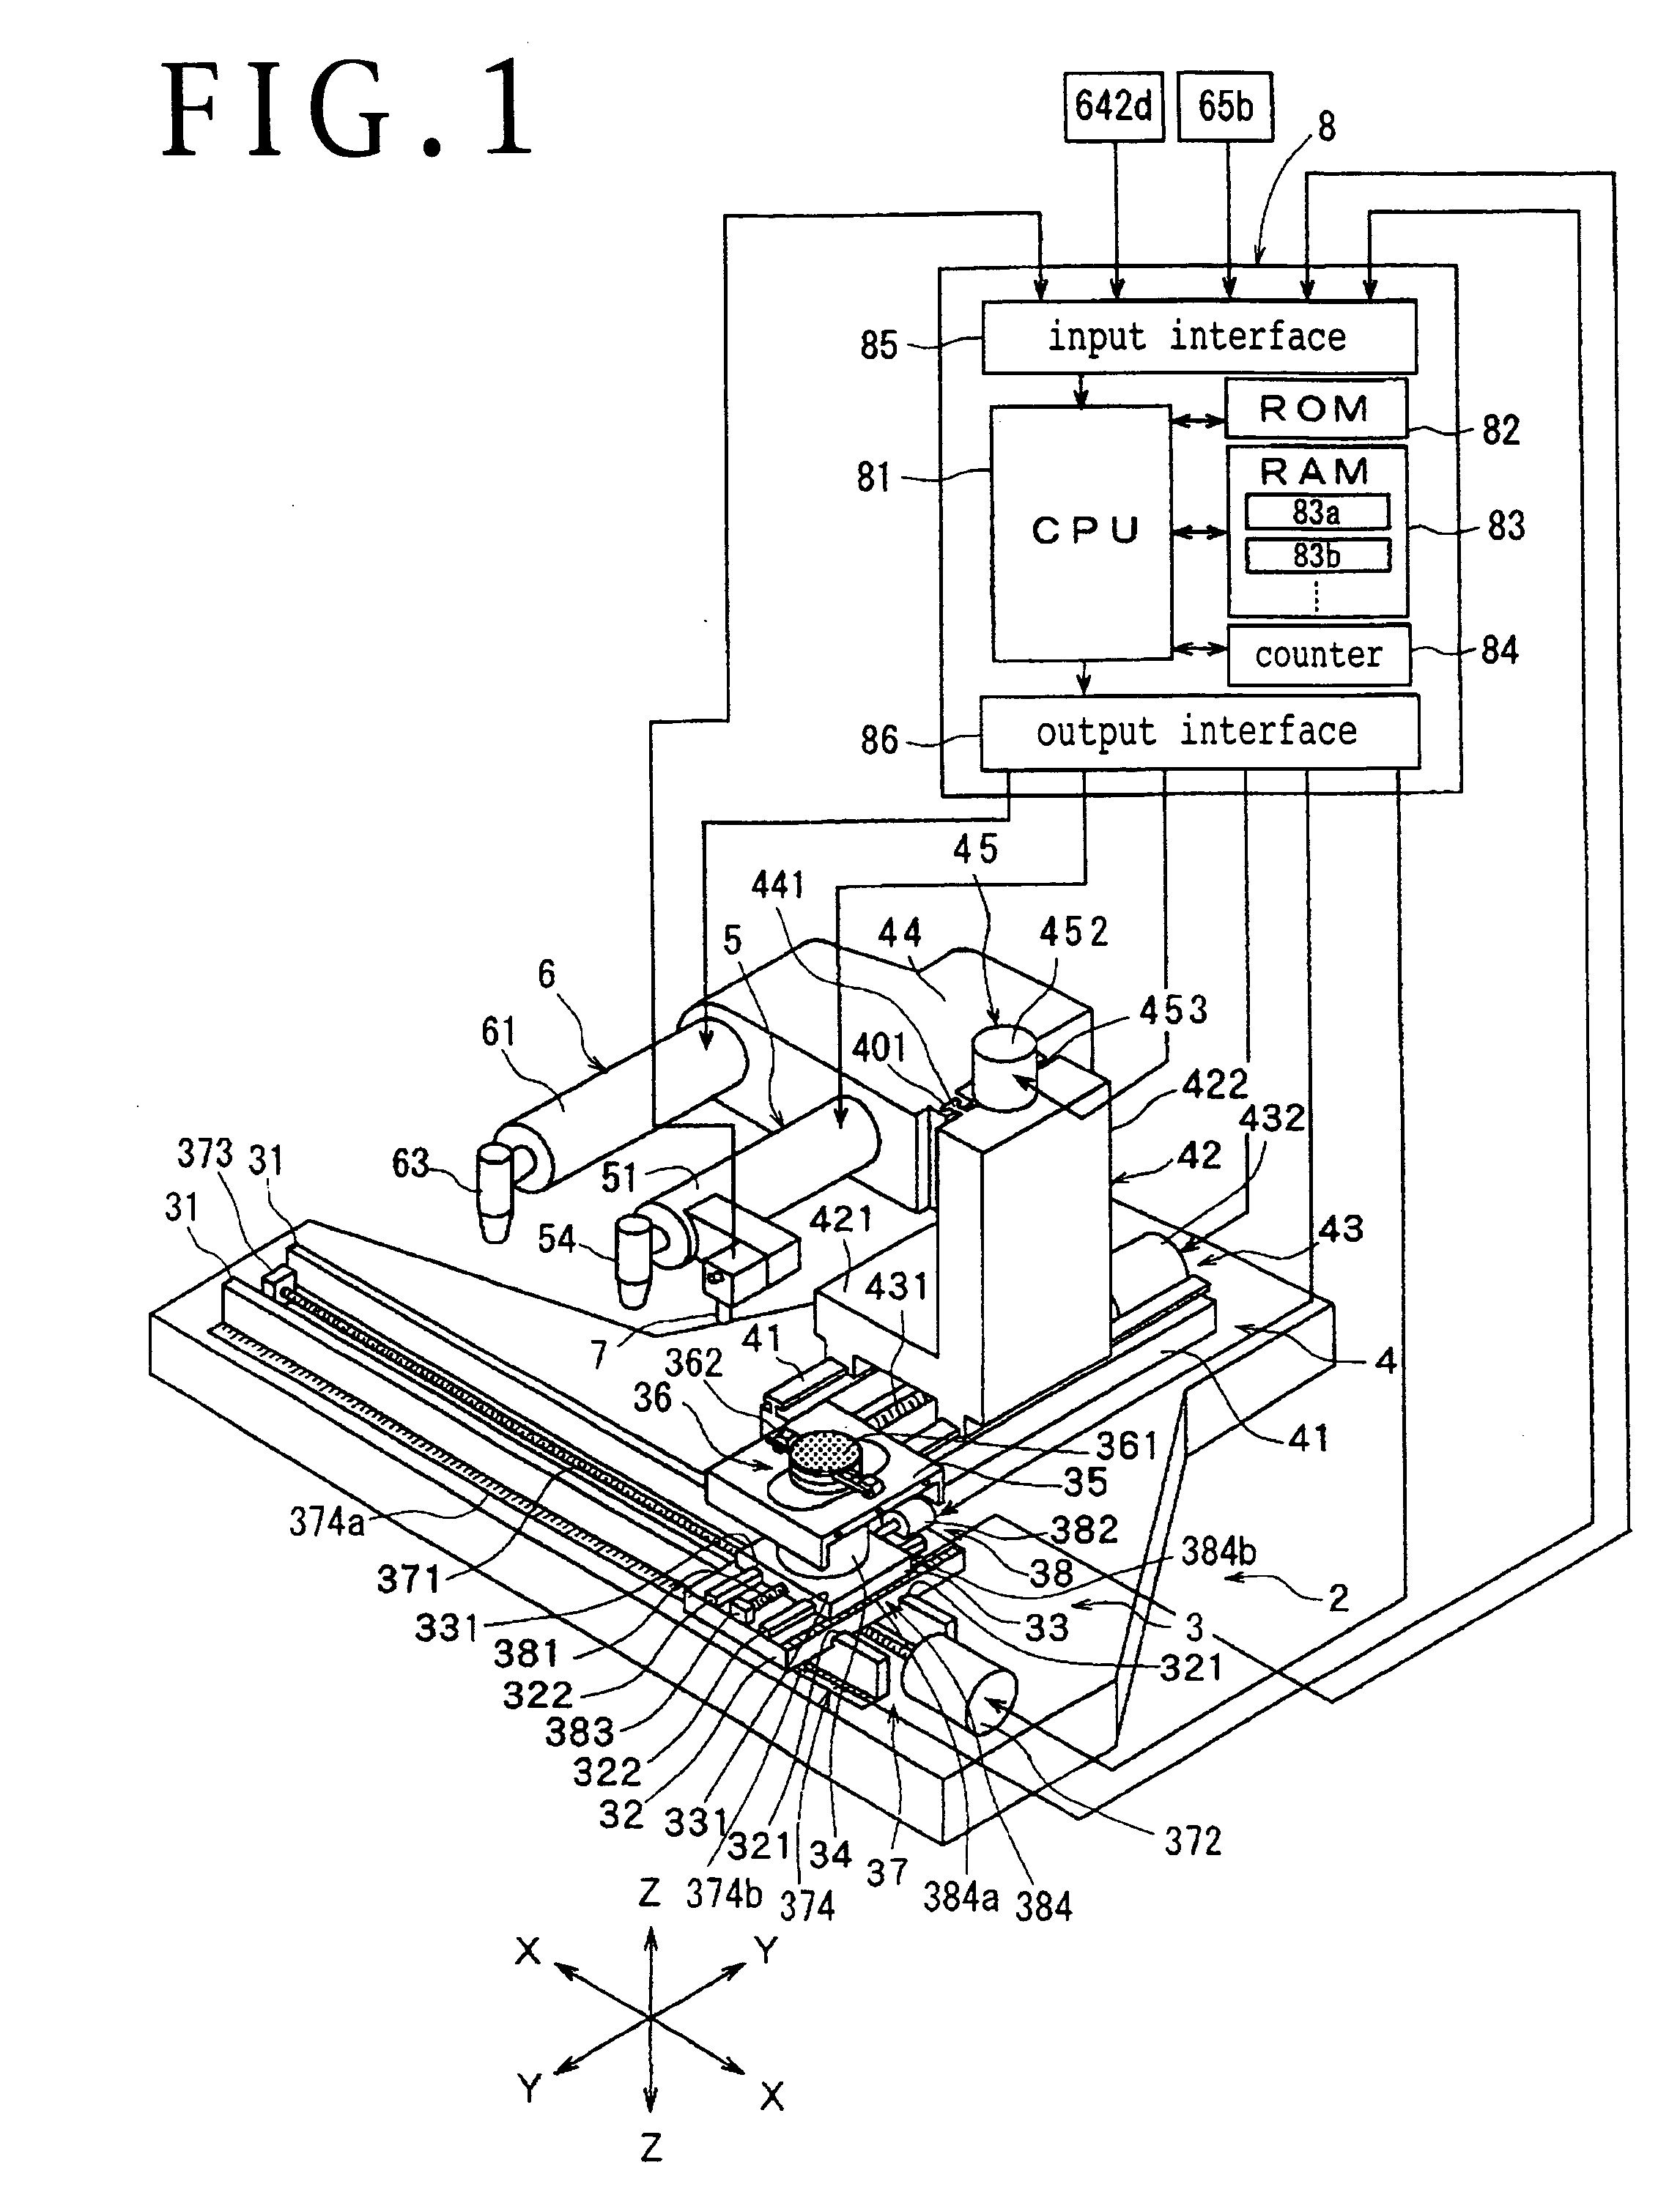 Measuring instrument and laser beam machine for wafer